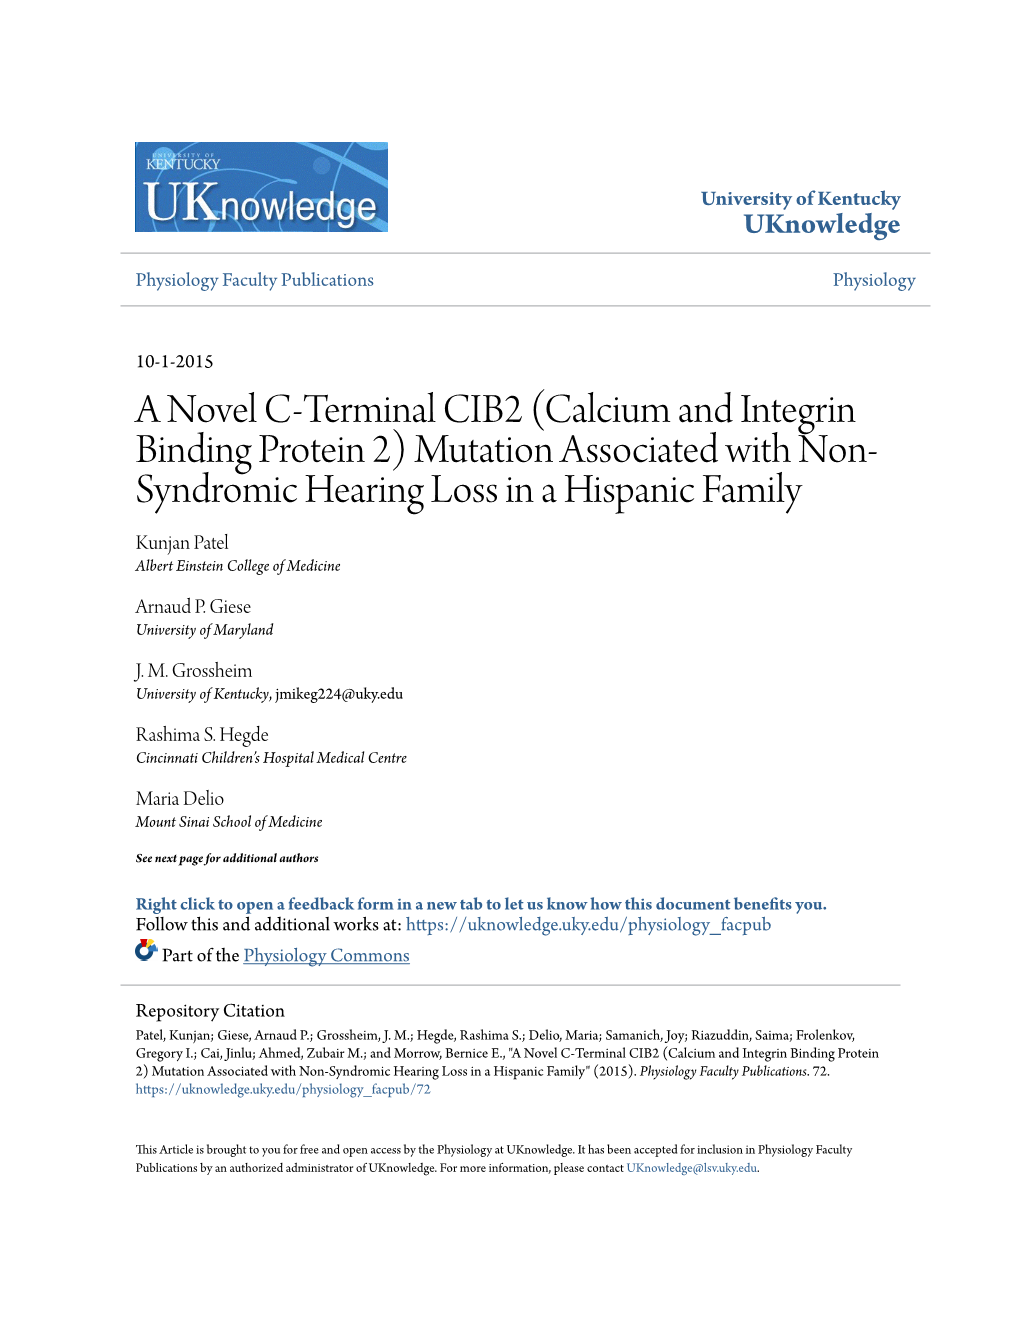 (Calcium and Integrin Binding Protein 2) Mutation Associated with Non- Syndromic Hearing Loss in a Hispanic Family Kunjan Patel Albert Einstein College of Medicine